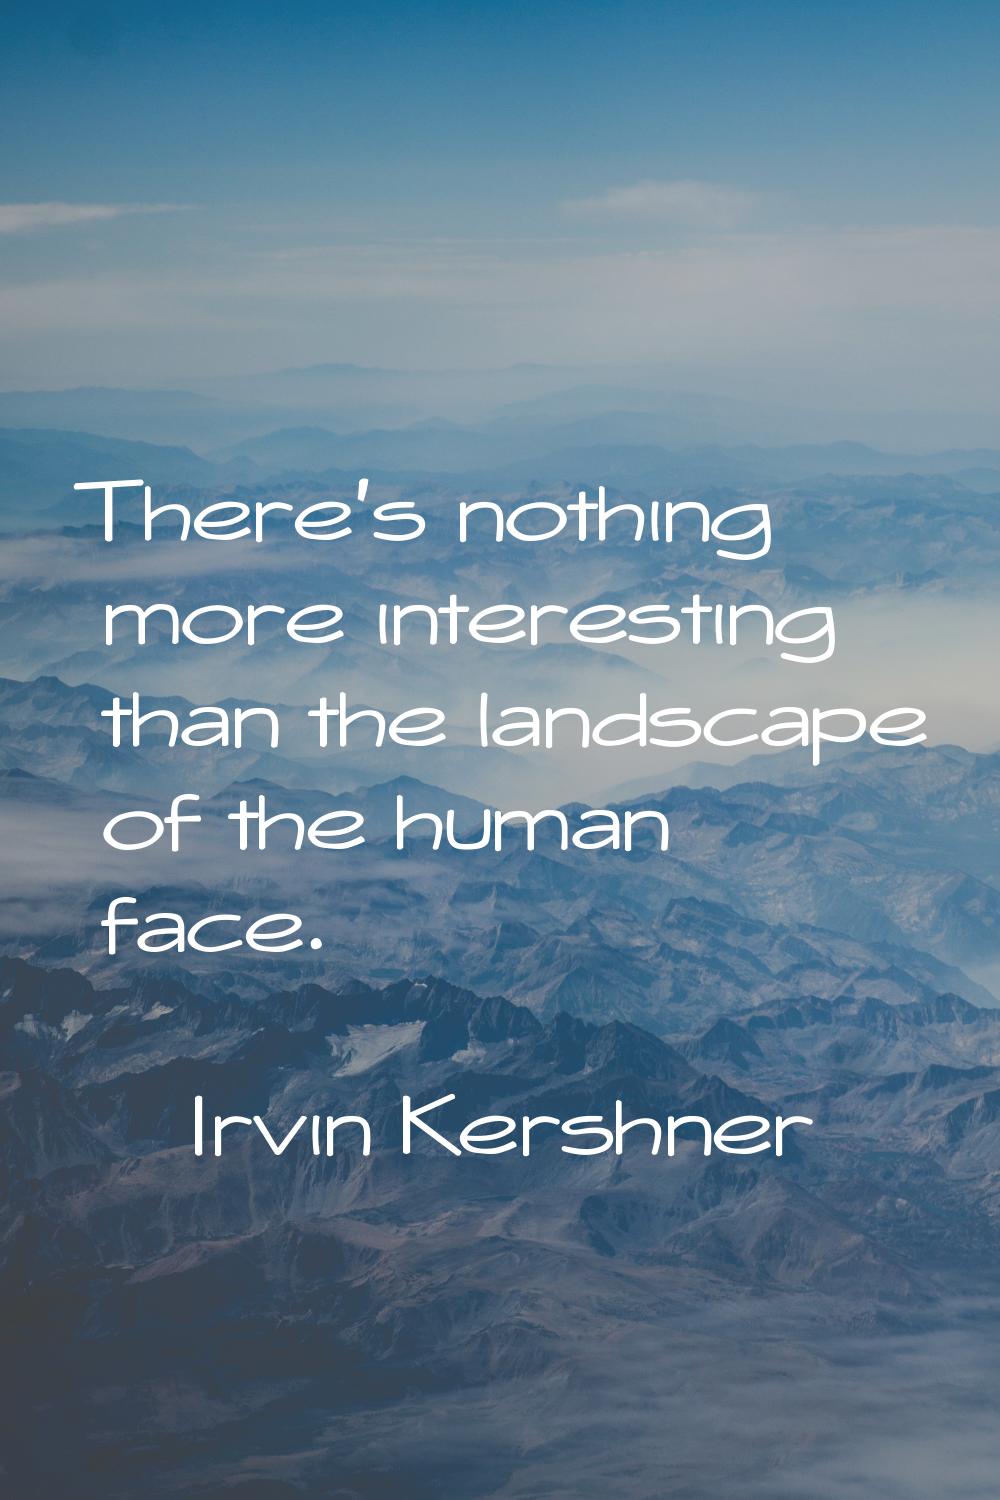 There's nothing more interesting than the landscape of the human face.